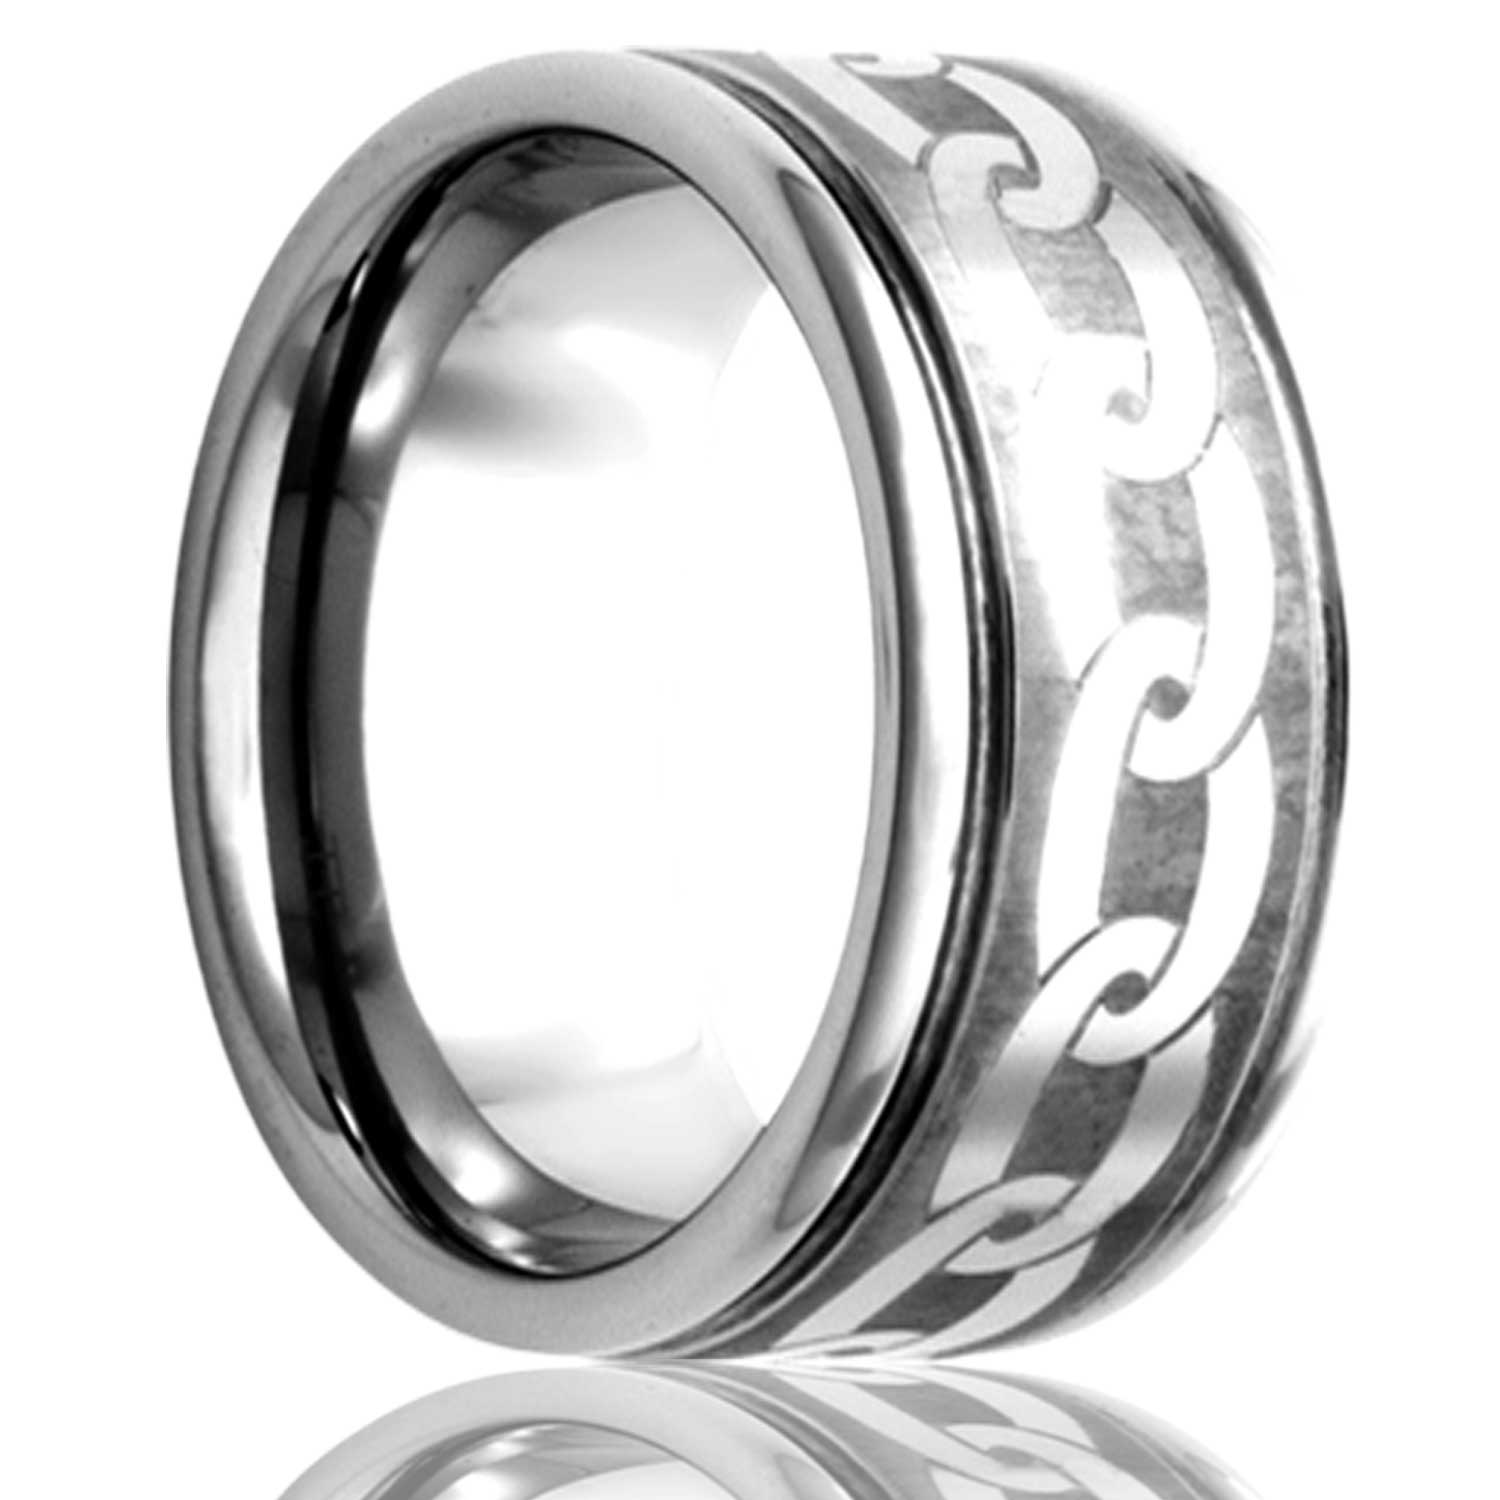 A chain pattern grooved cobalt wedding band displayed on a neutral white background.